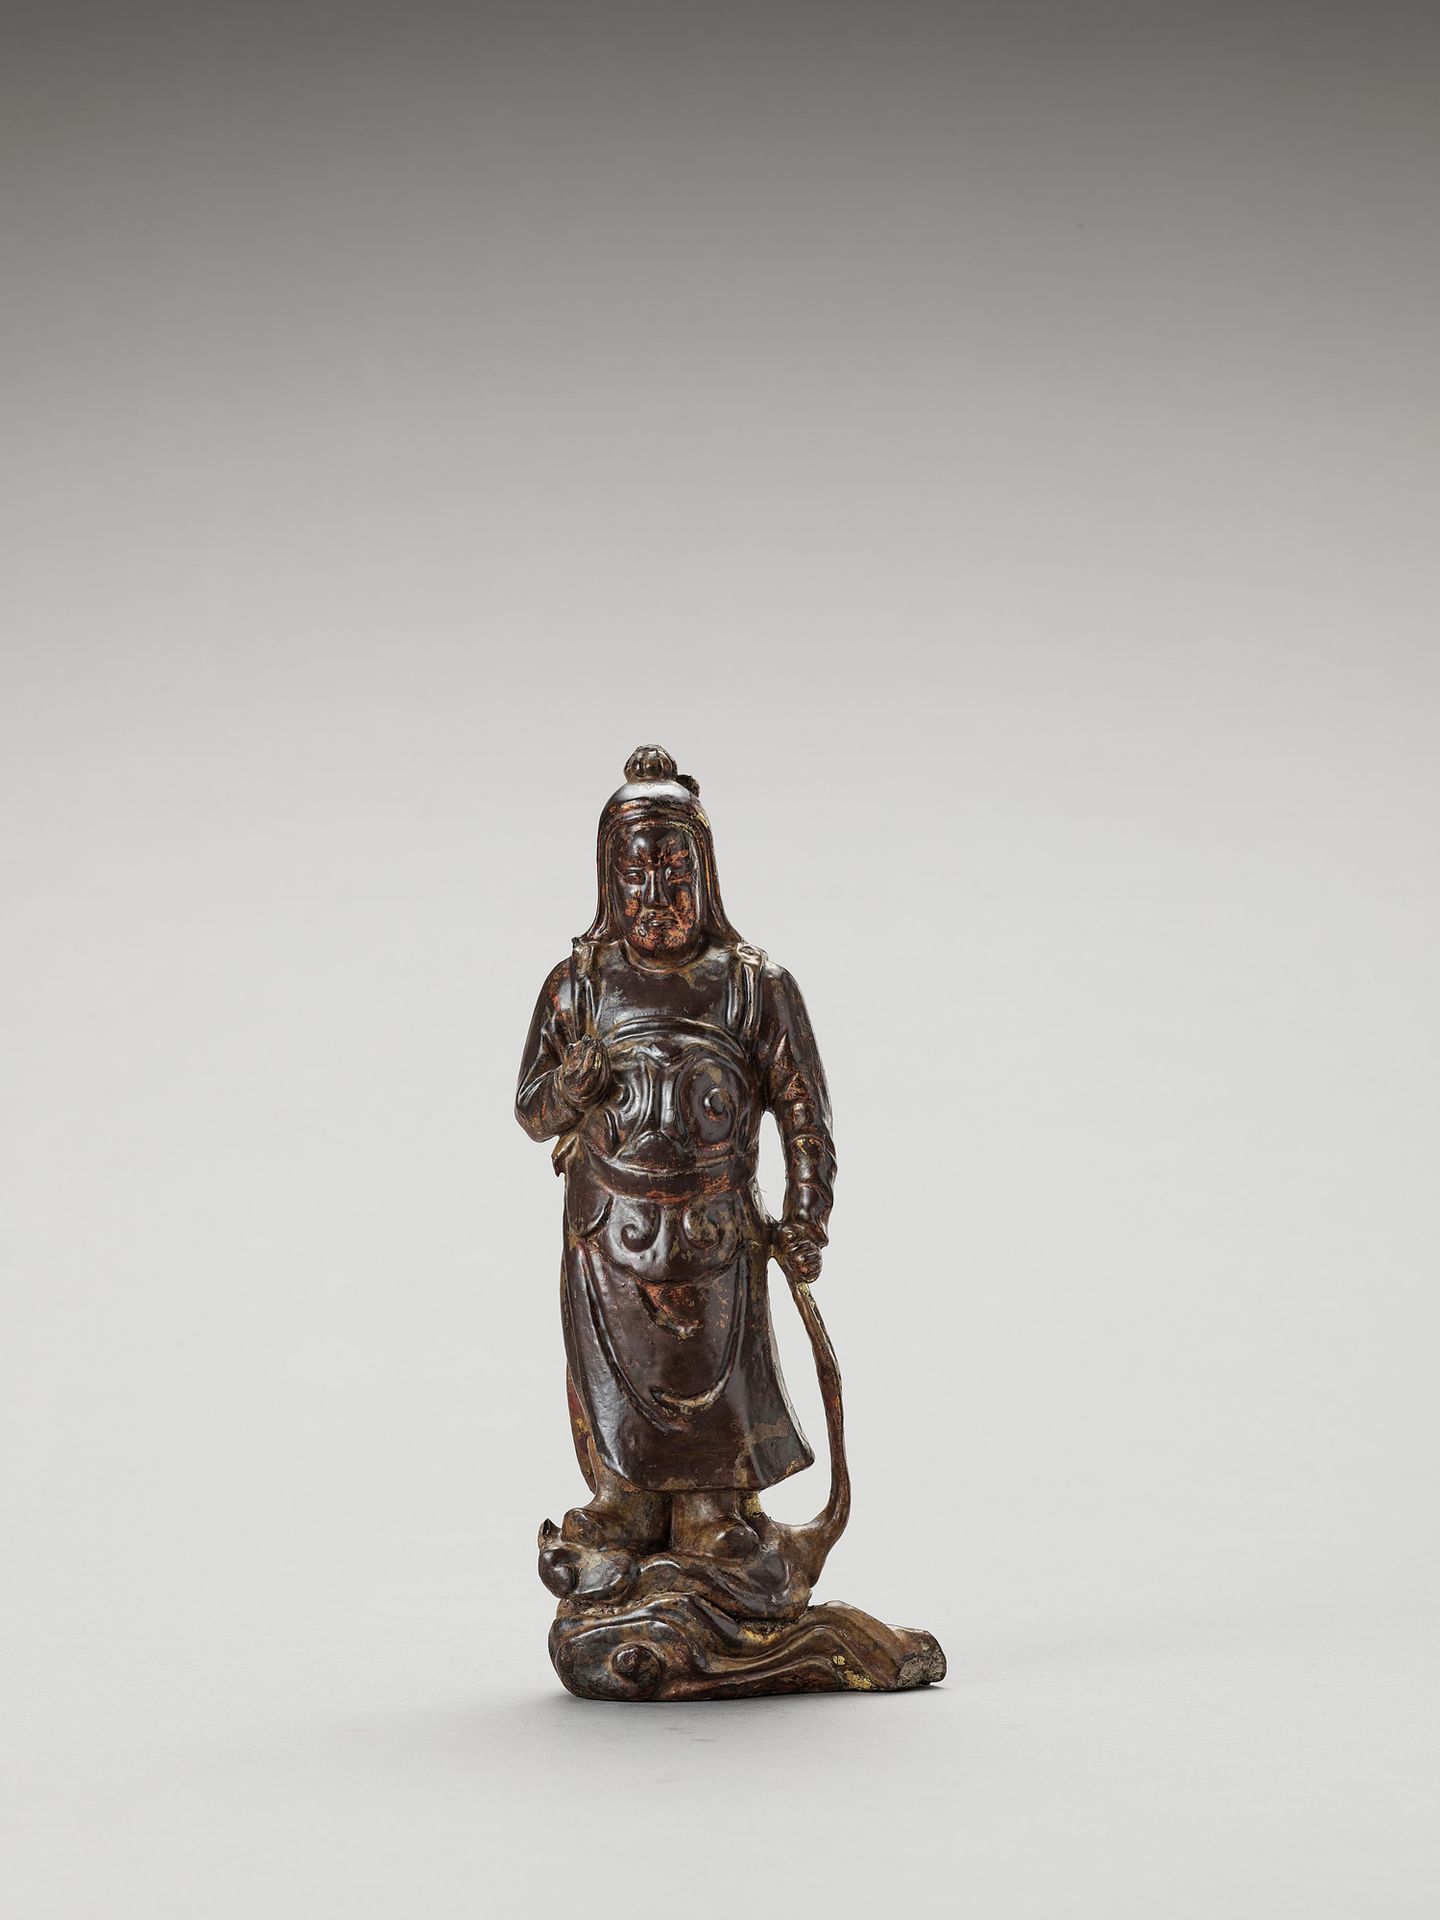 A GILT AND LACQUERED WOOD FIGURE OF A HEAVENLY KING, MING 明代天王木雕，
中国，17世纪，明朝（136&hellip;